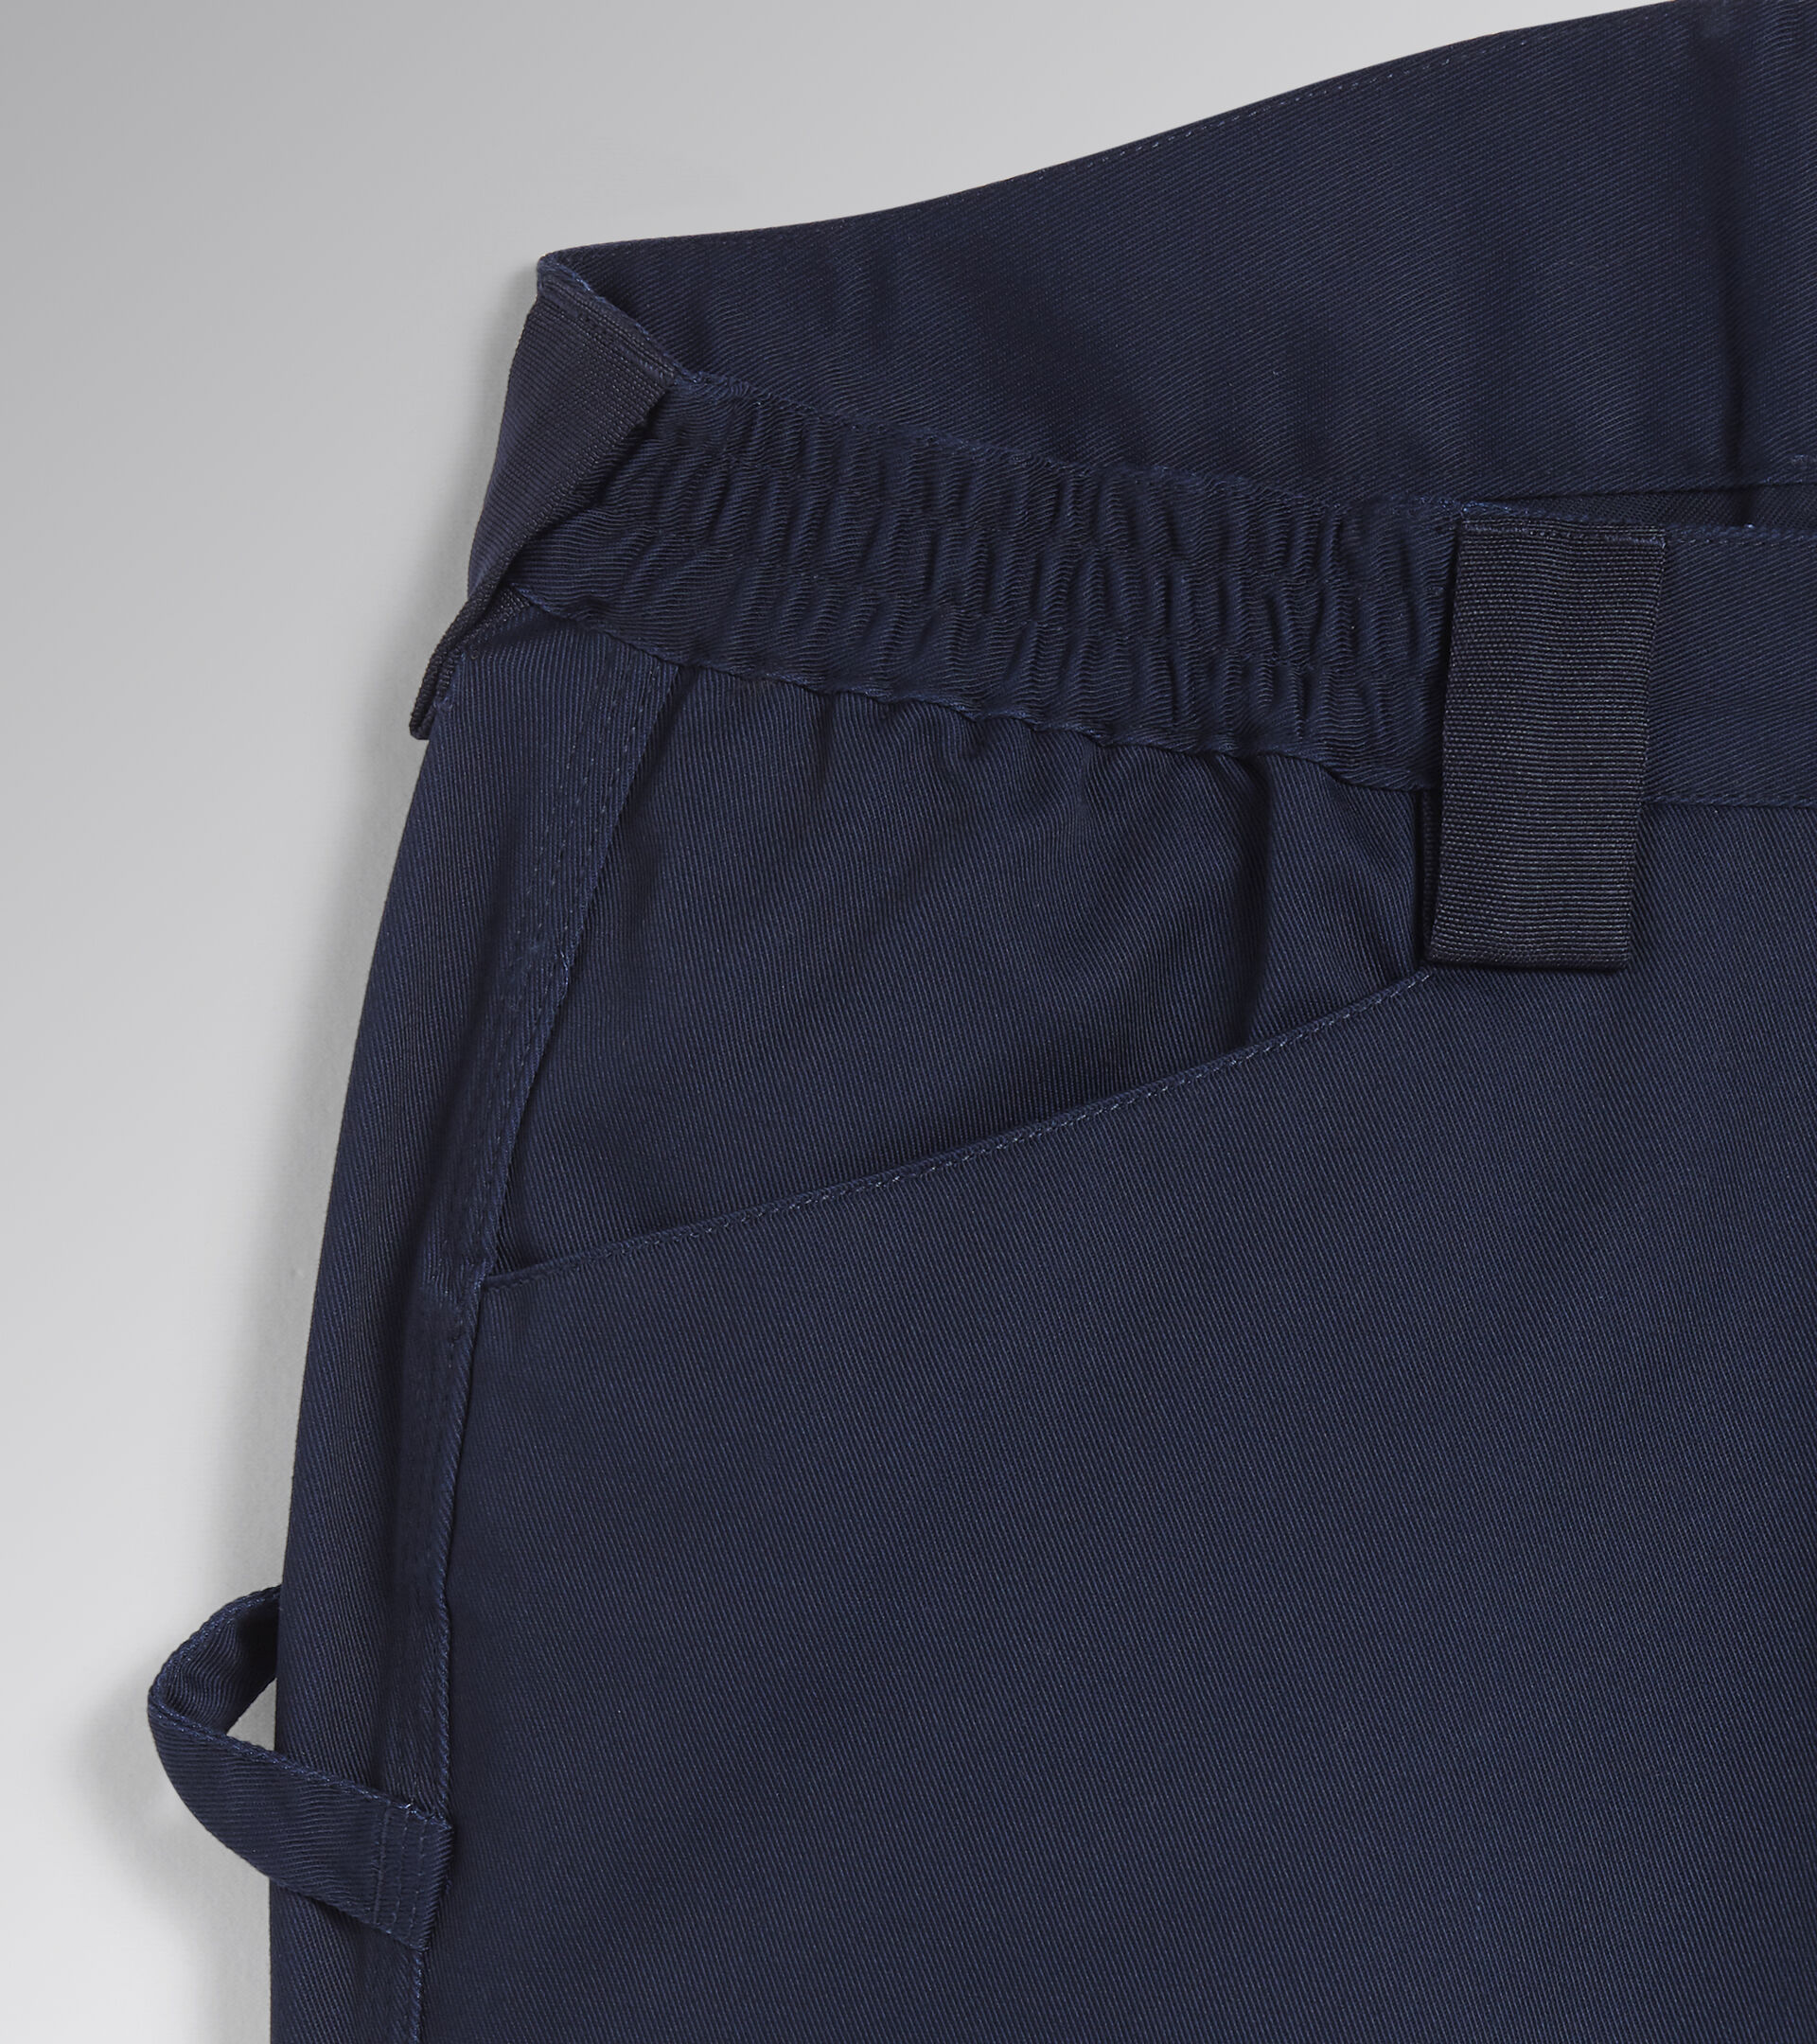 Work trousers PANT ROCK WINTER PERFORMANCE CLASSIC NAVY - Utility